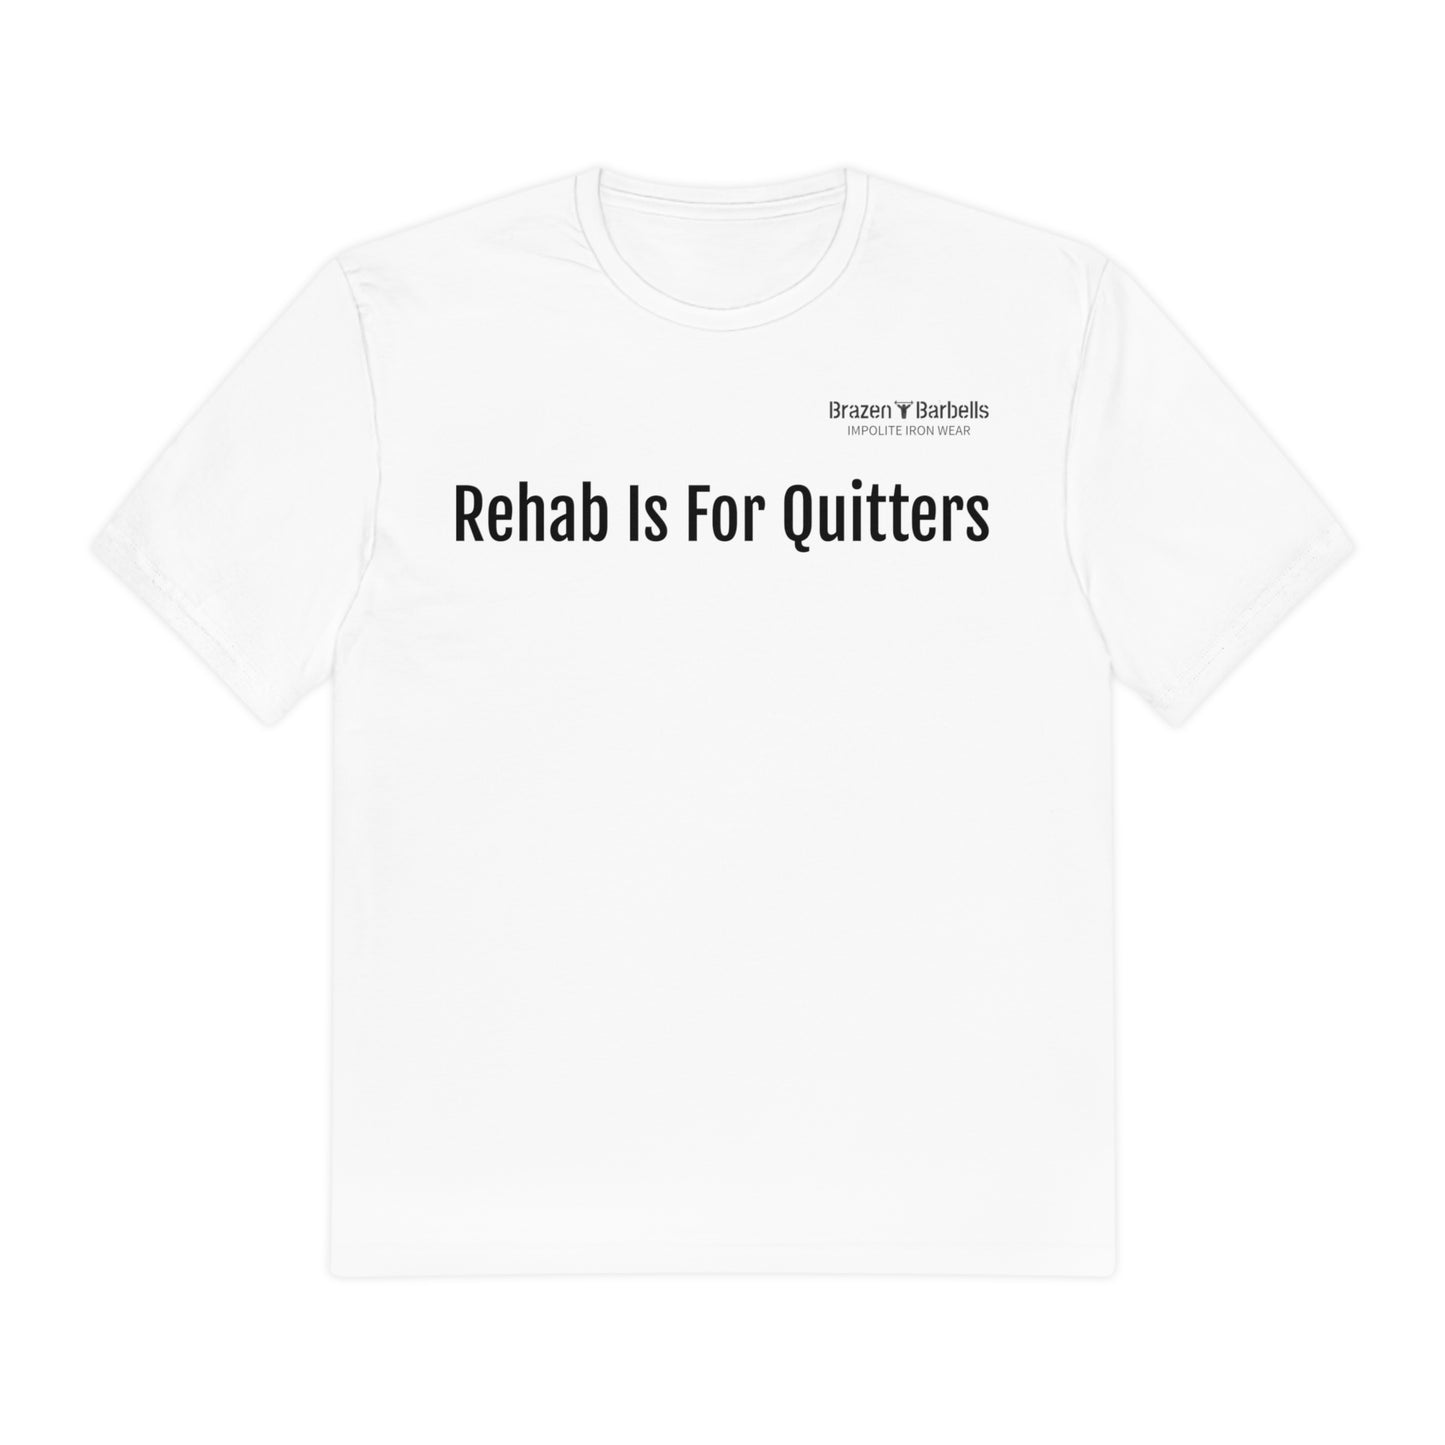 Rehab is for Quitters Tee